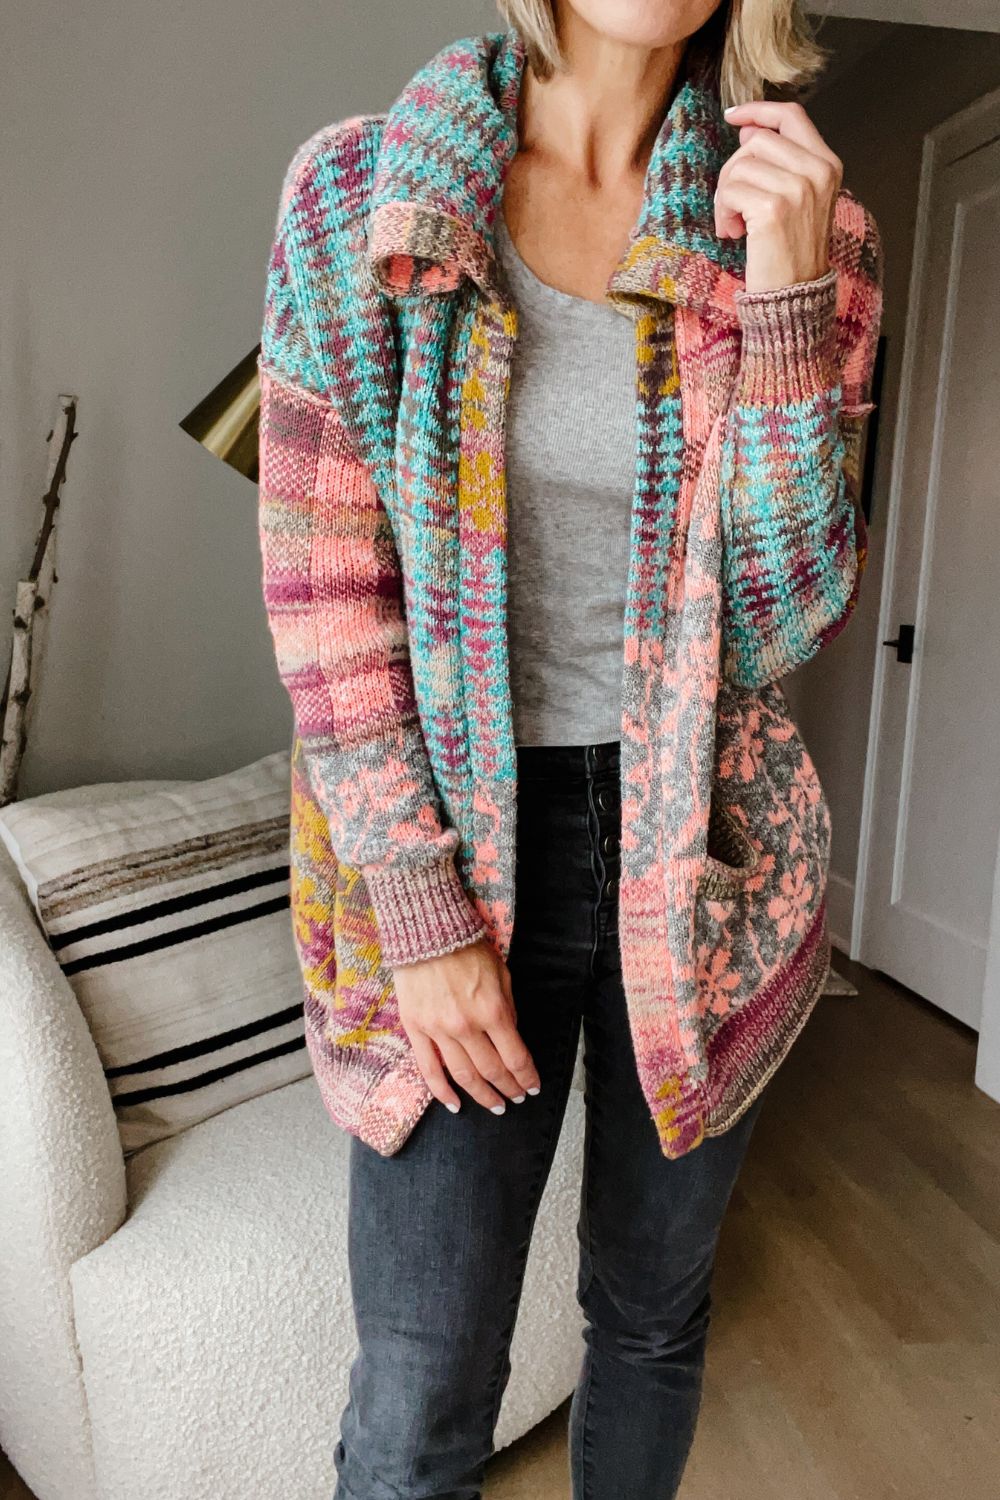 Suzanne wearing an Anthropologie cardigan